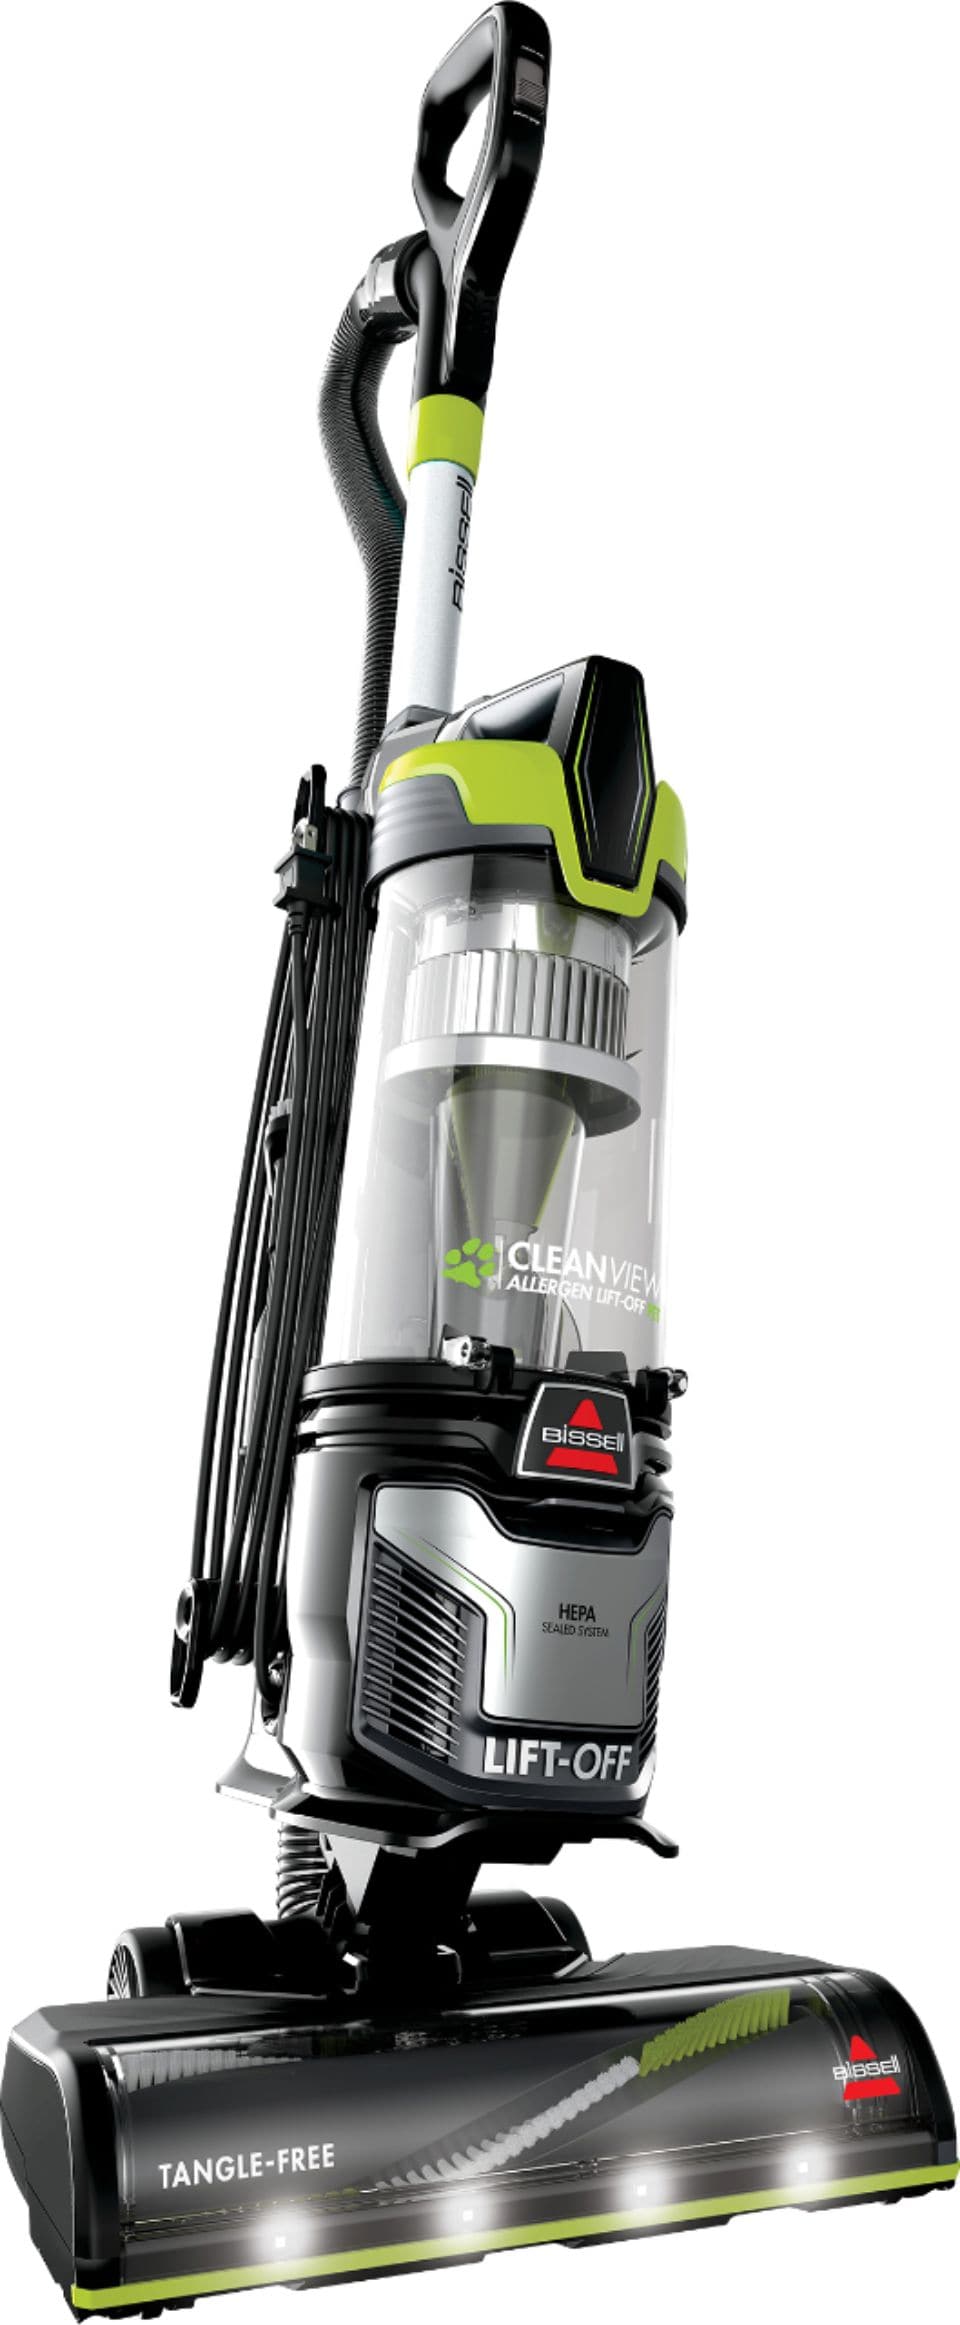 BISSELL - CleanView Allergen Lift-Off Pet Vacuum - Black/ Electric Green_1